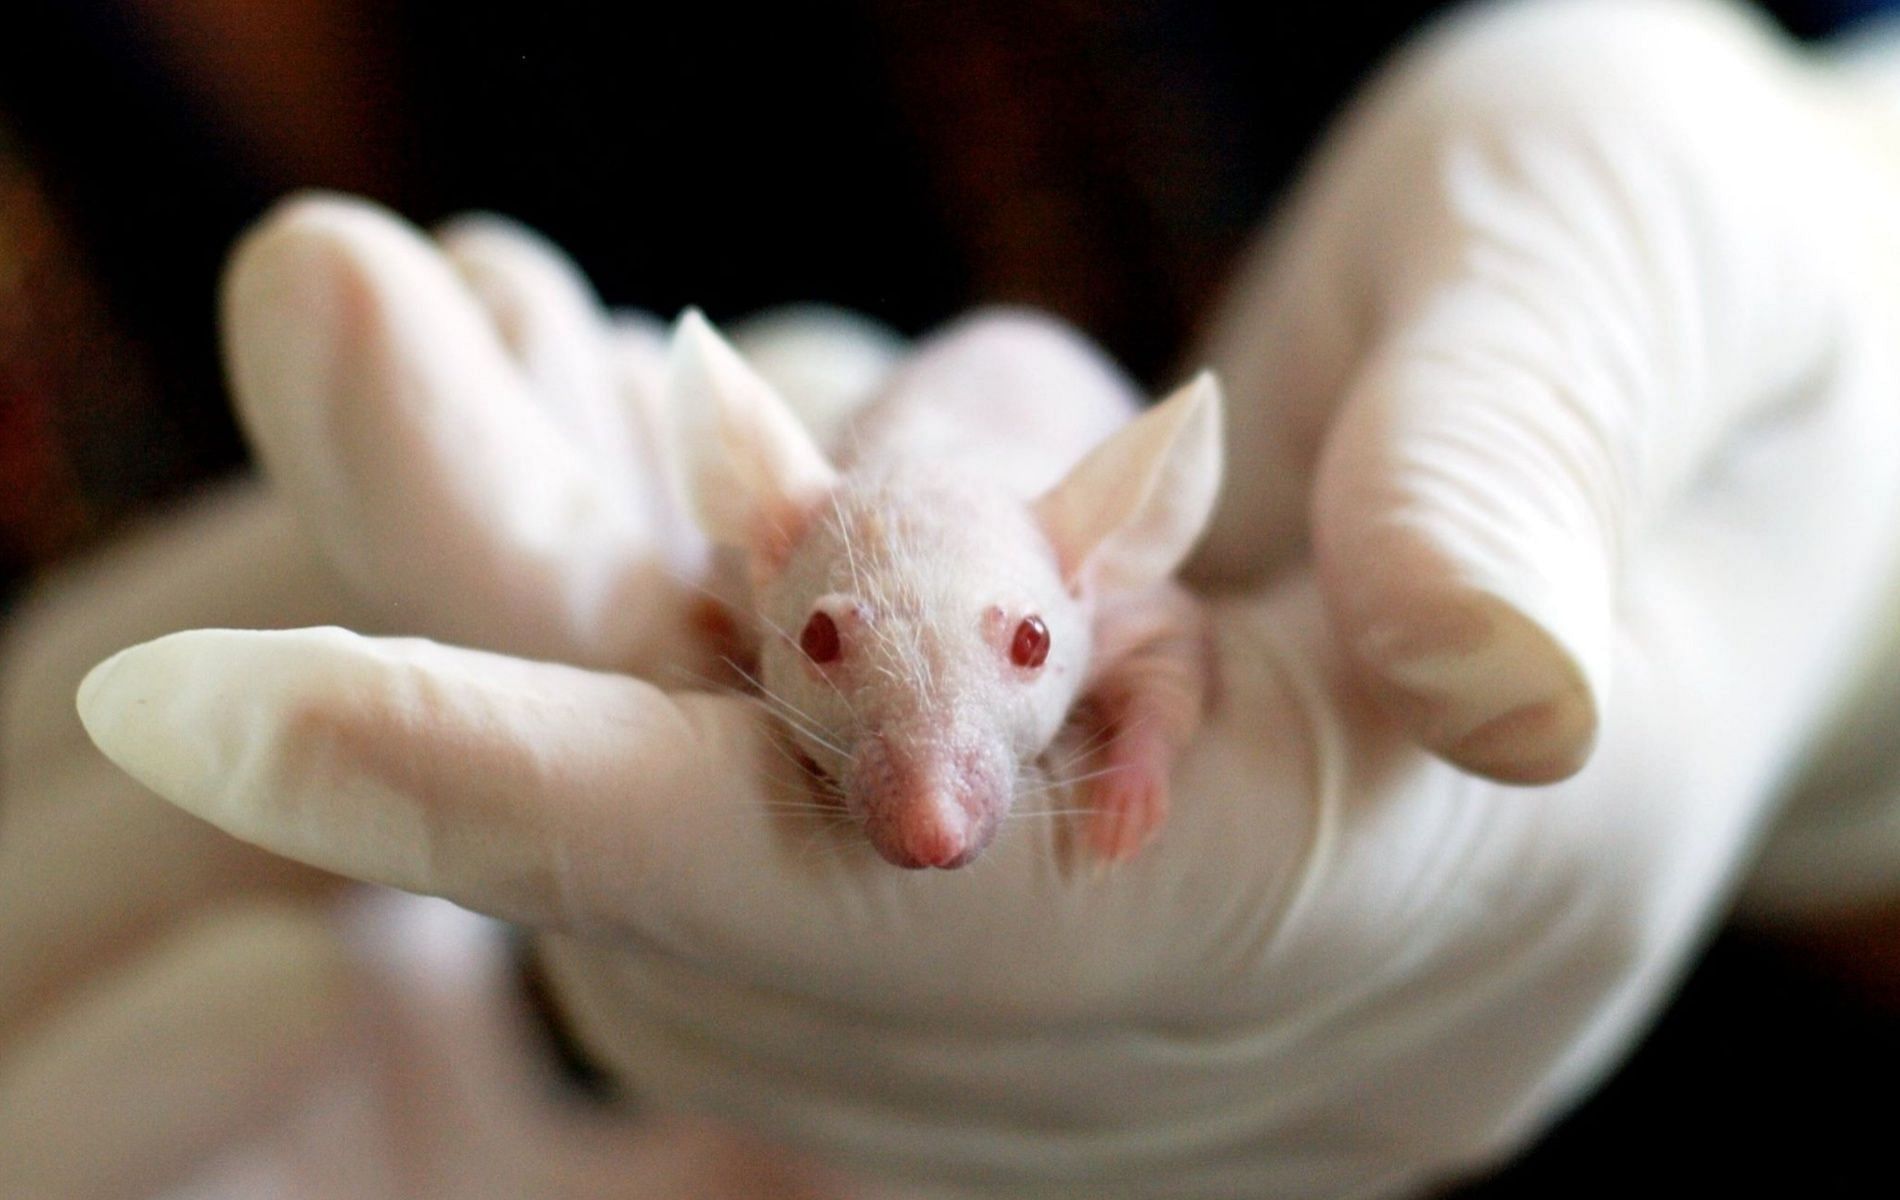 The test was carried out on the brains of mice that showed intriguing results. (Image via Pexels)